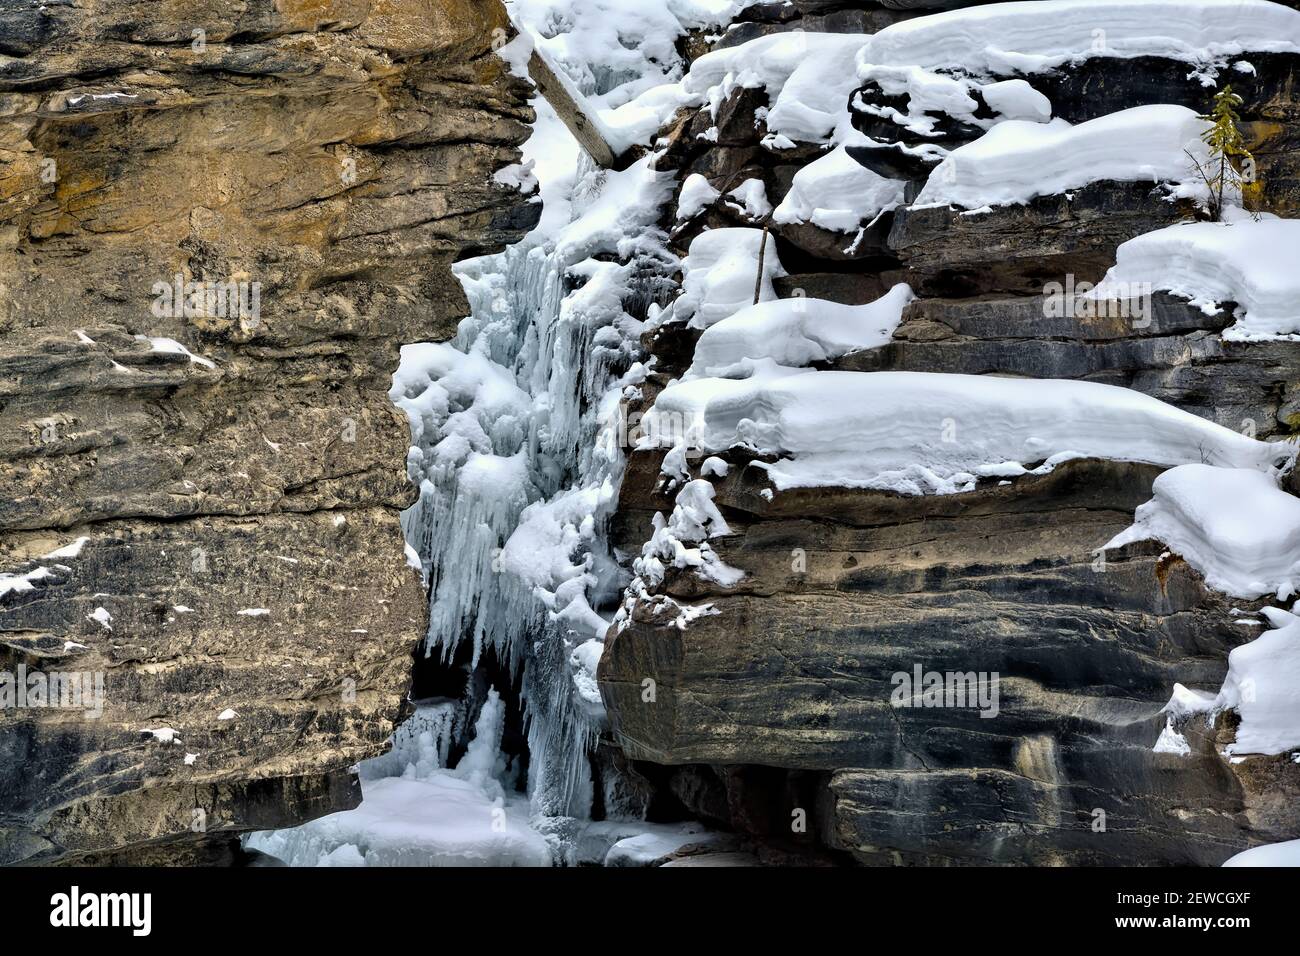 A horizontal image of The Athabasca canyon walls with ice and snow clinging to the rock in winter in Jasper National Park in Alberta Canada. Stock Photo